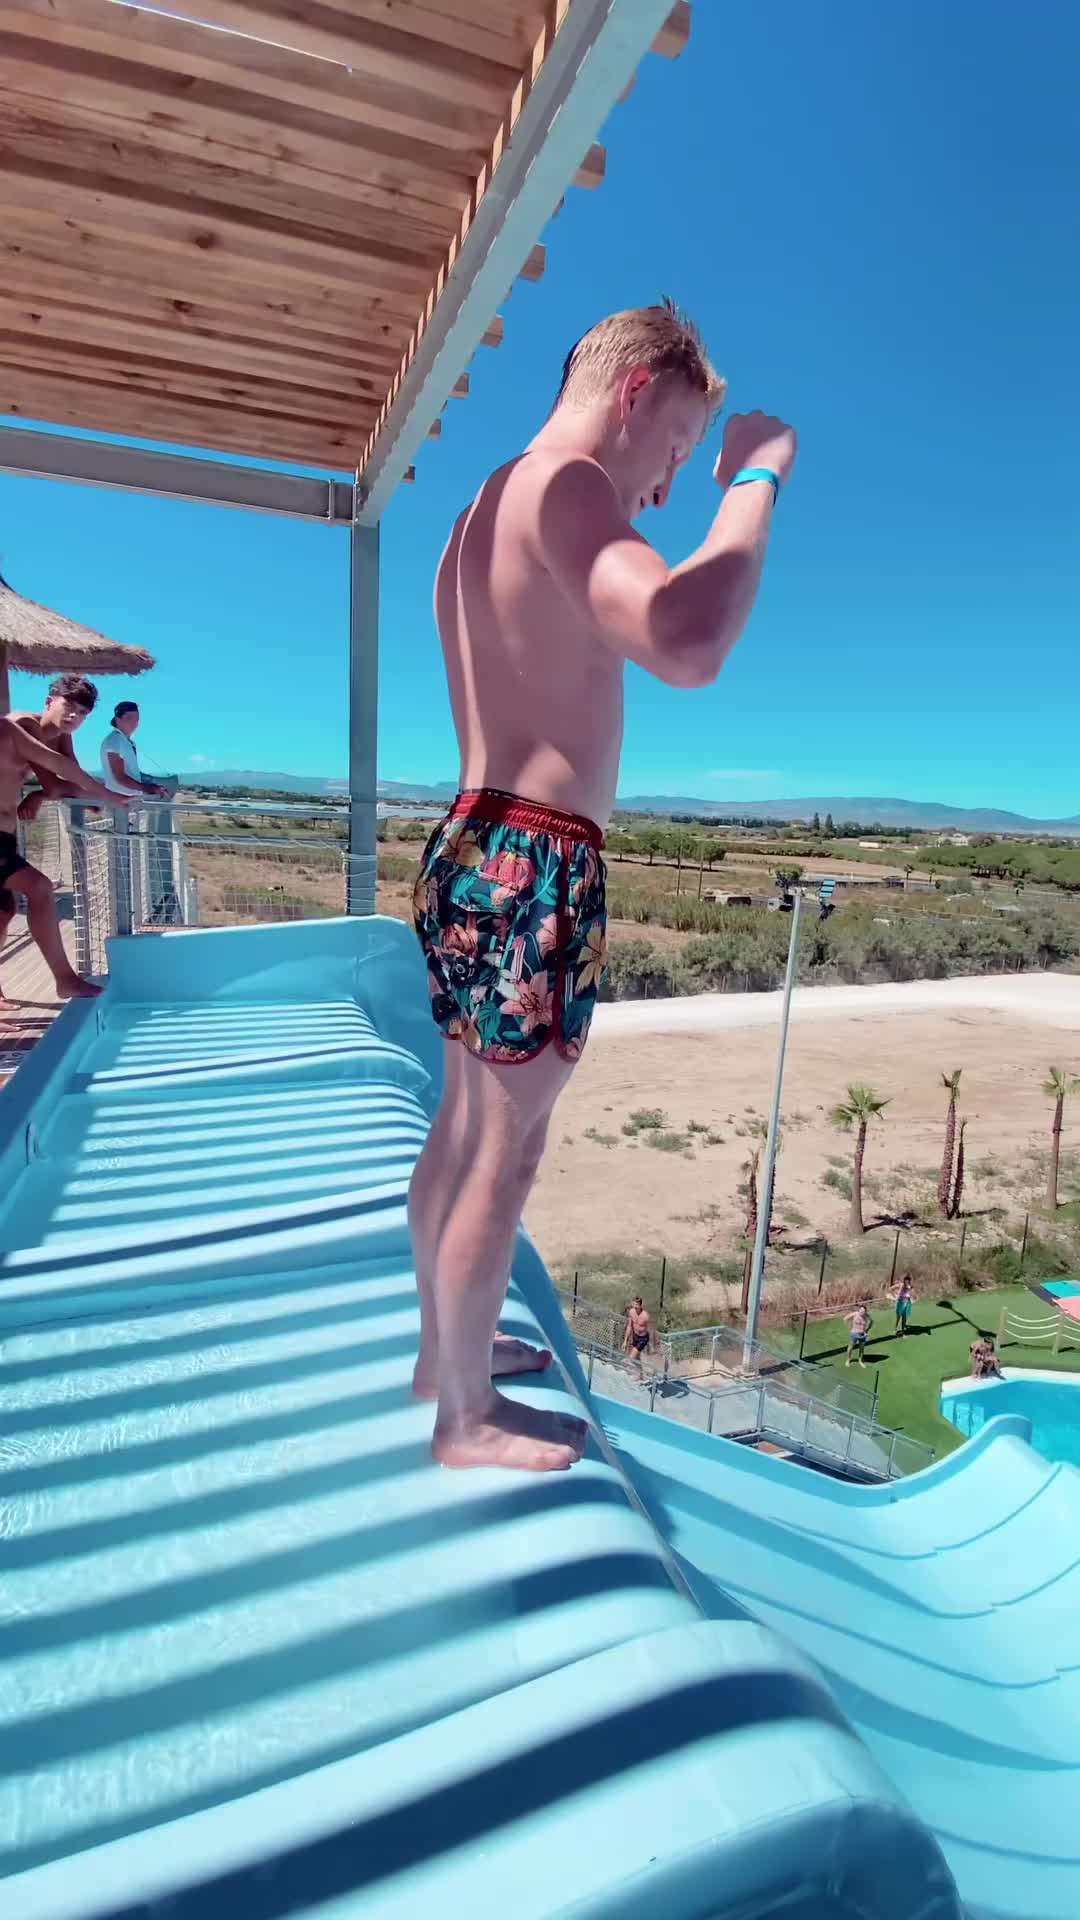 Epic Frontflip at Frenzy Waterpark in France 🌊